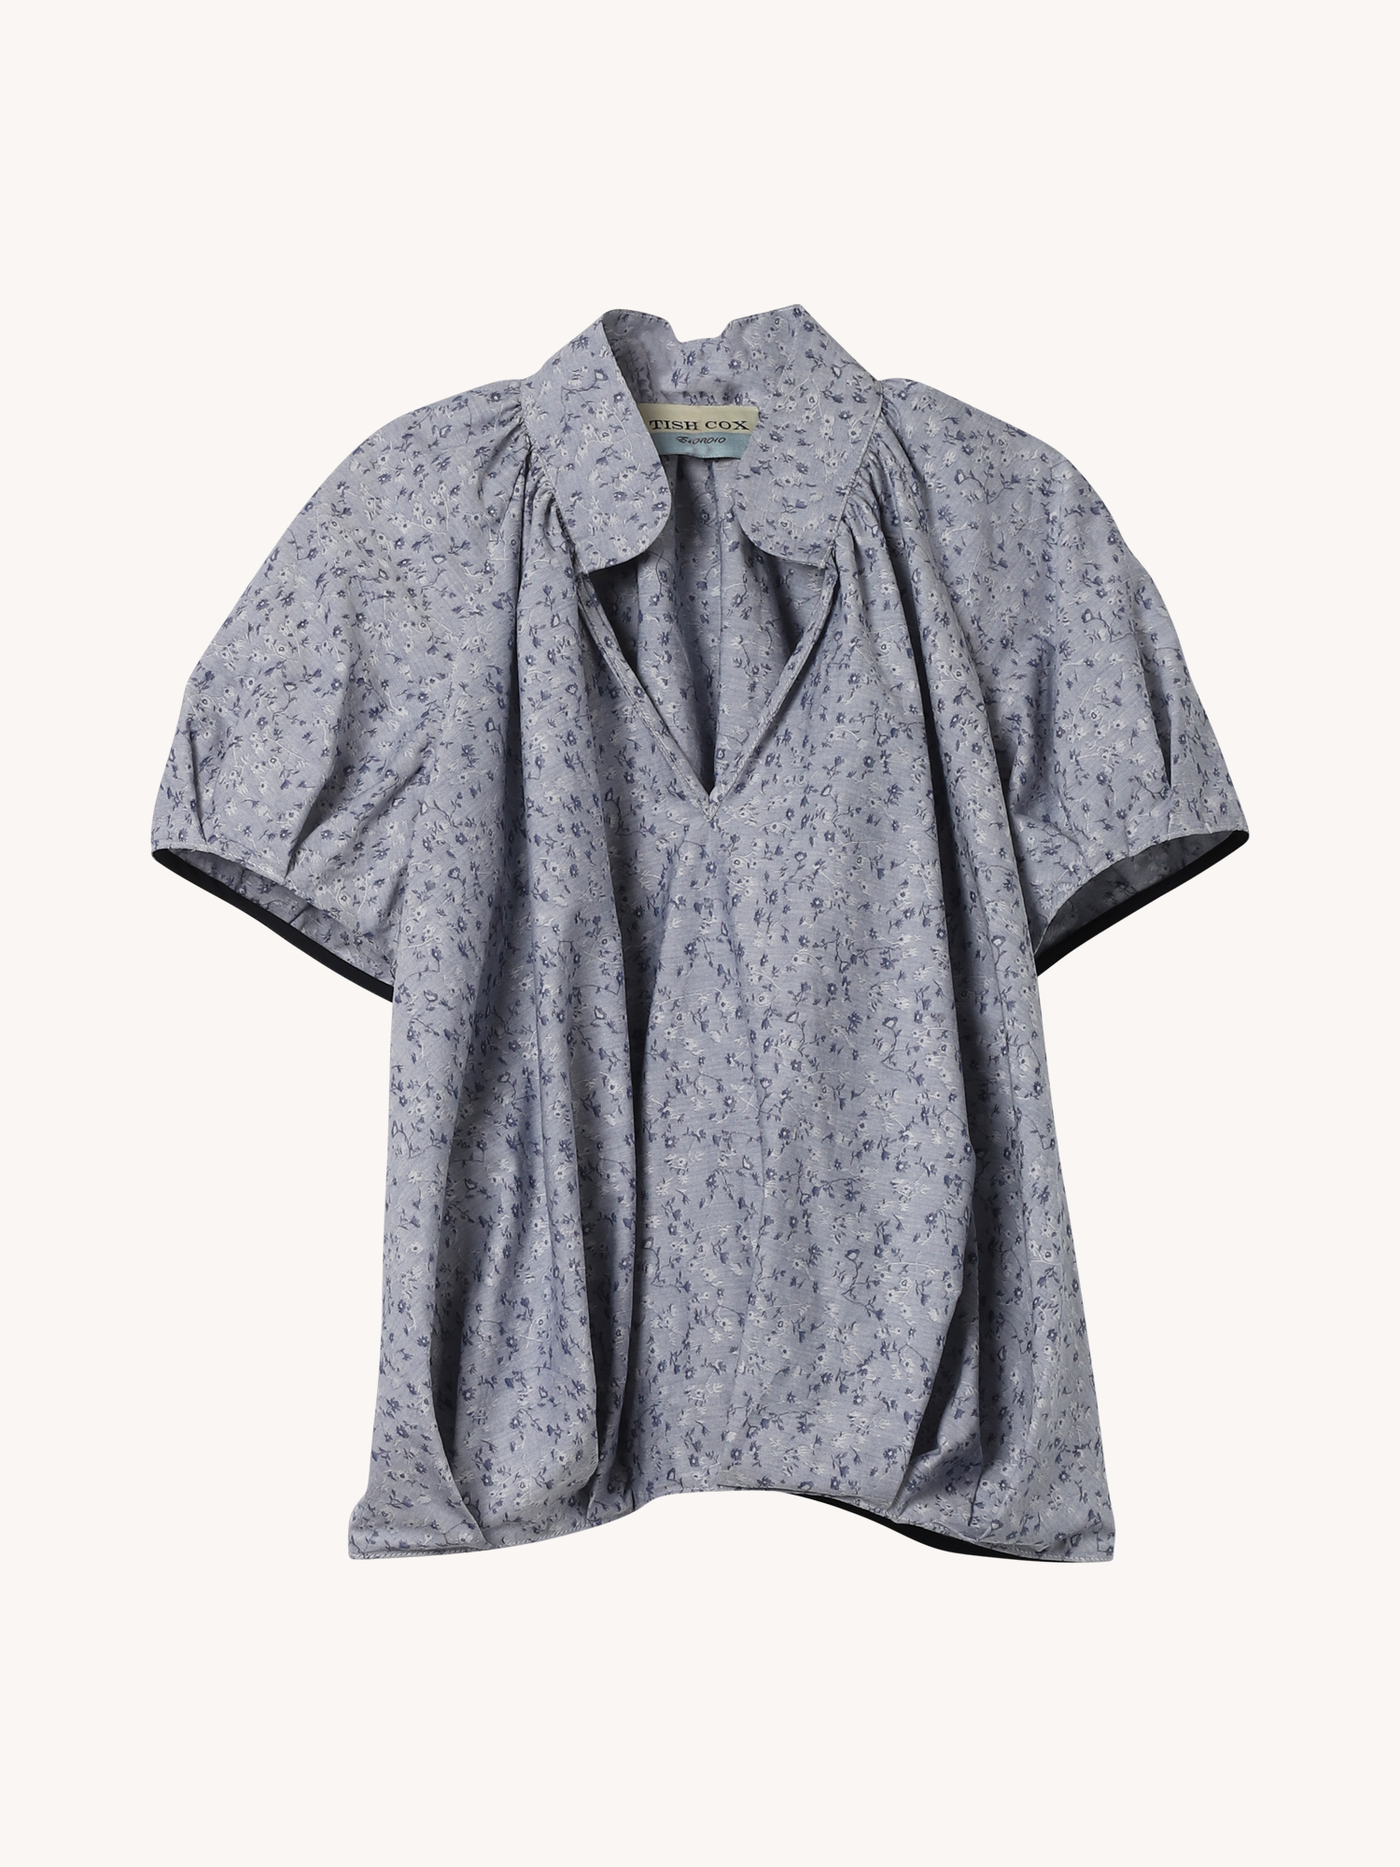 Chambray Floral Aubrey Top